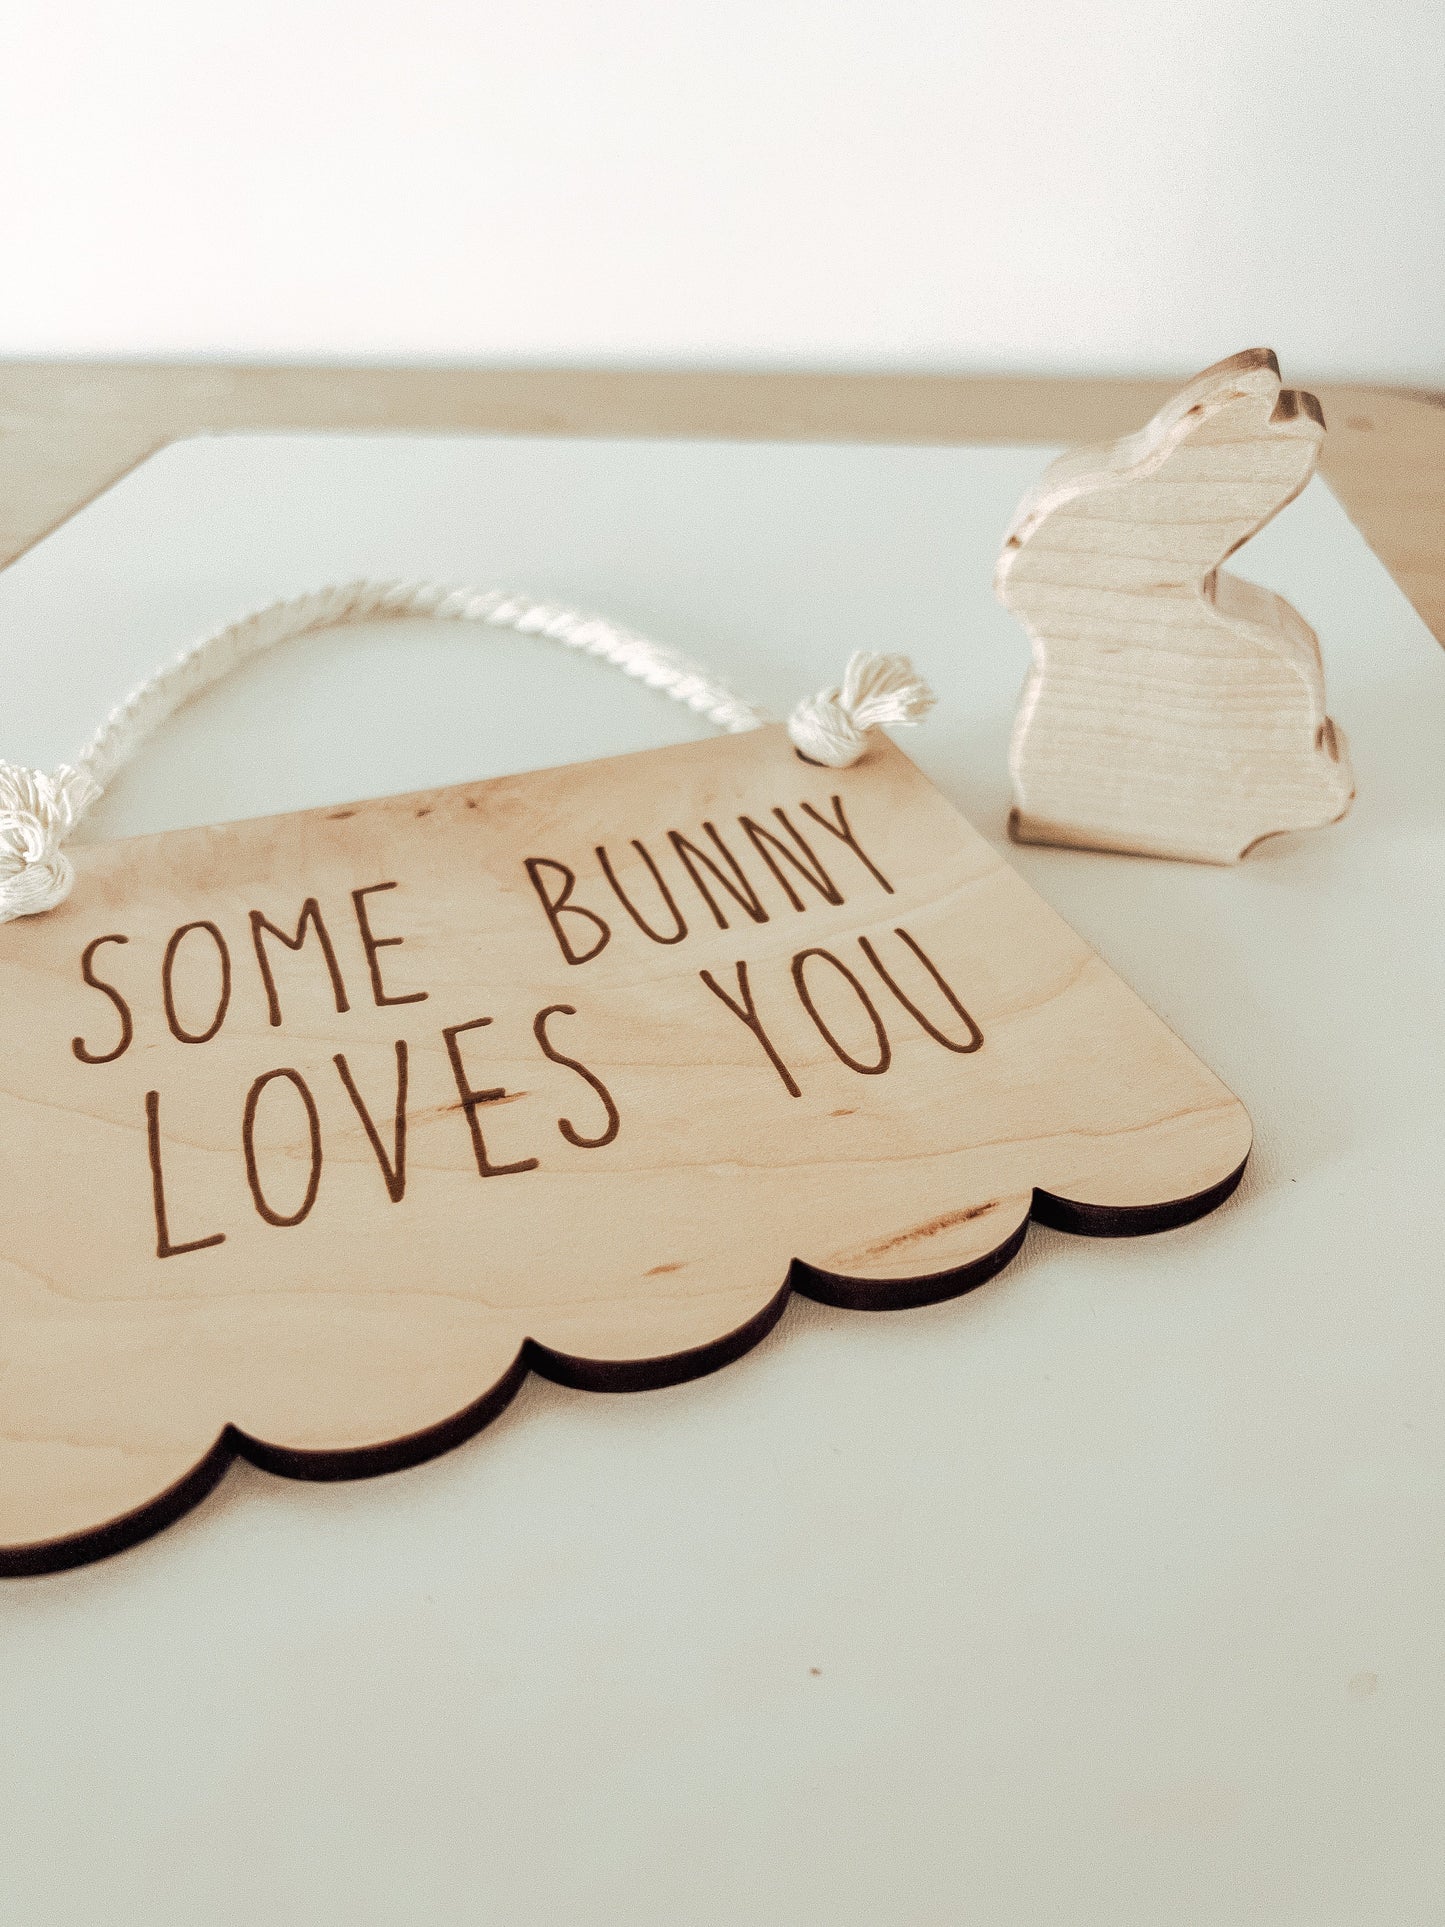 "Some Bunny Loves You" Sign